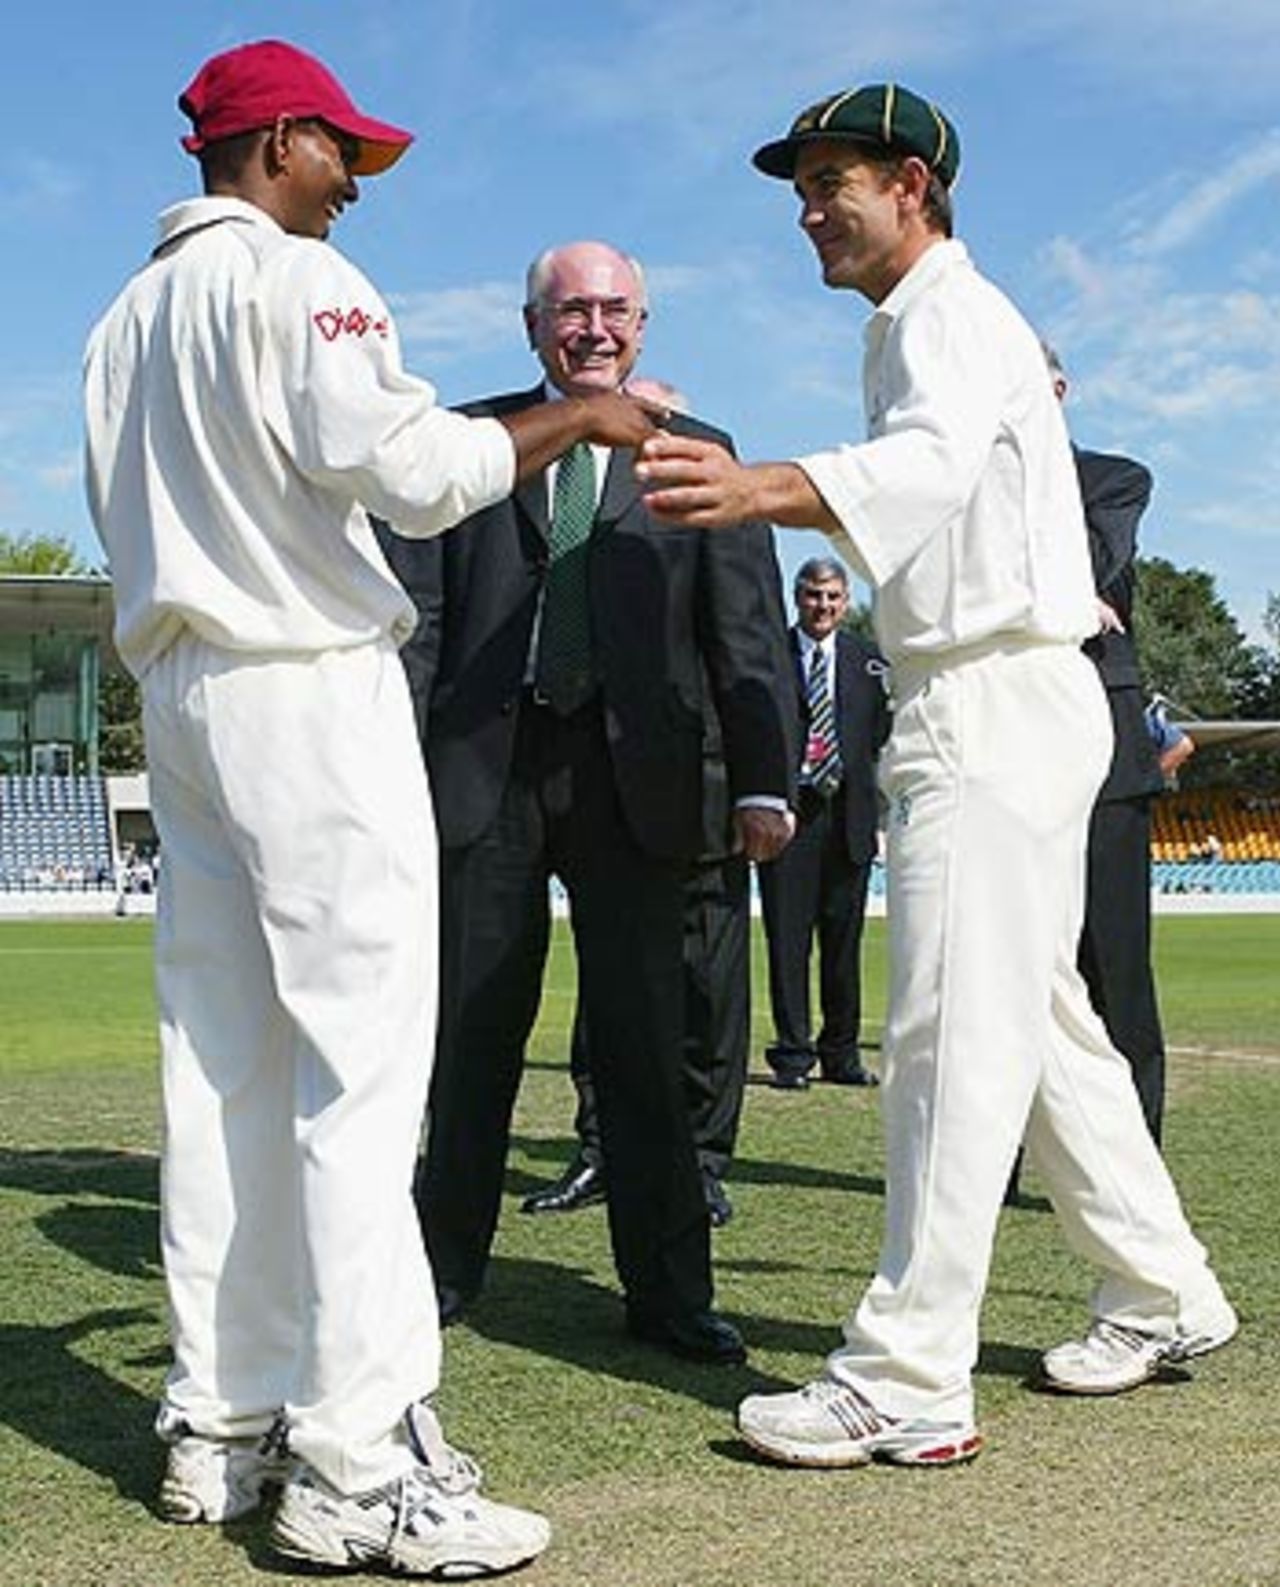 Shivnarine Chanderpaul and Justin Langer at the toss, Prime Minister's XI v West Indians, Canberra, December 2, 2005